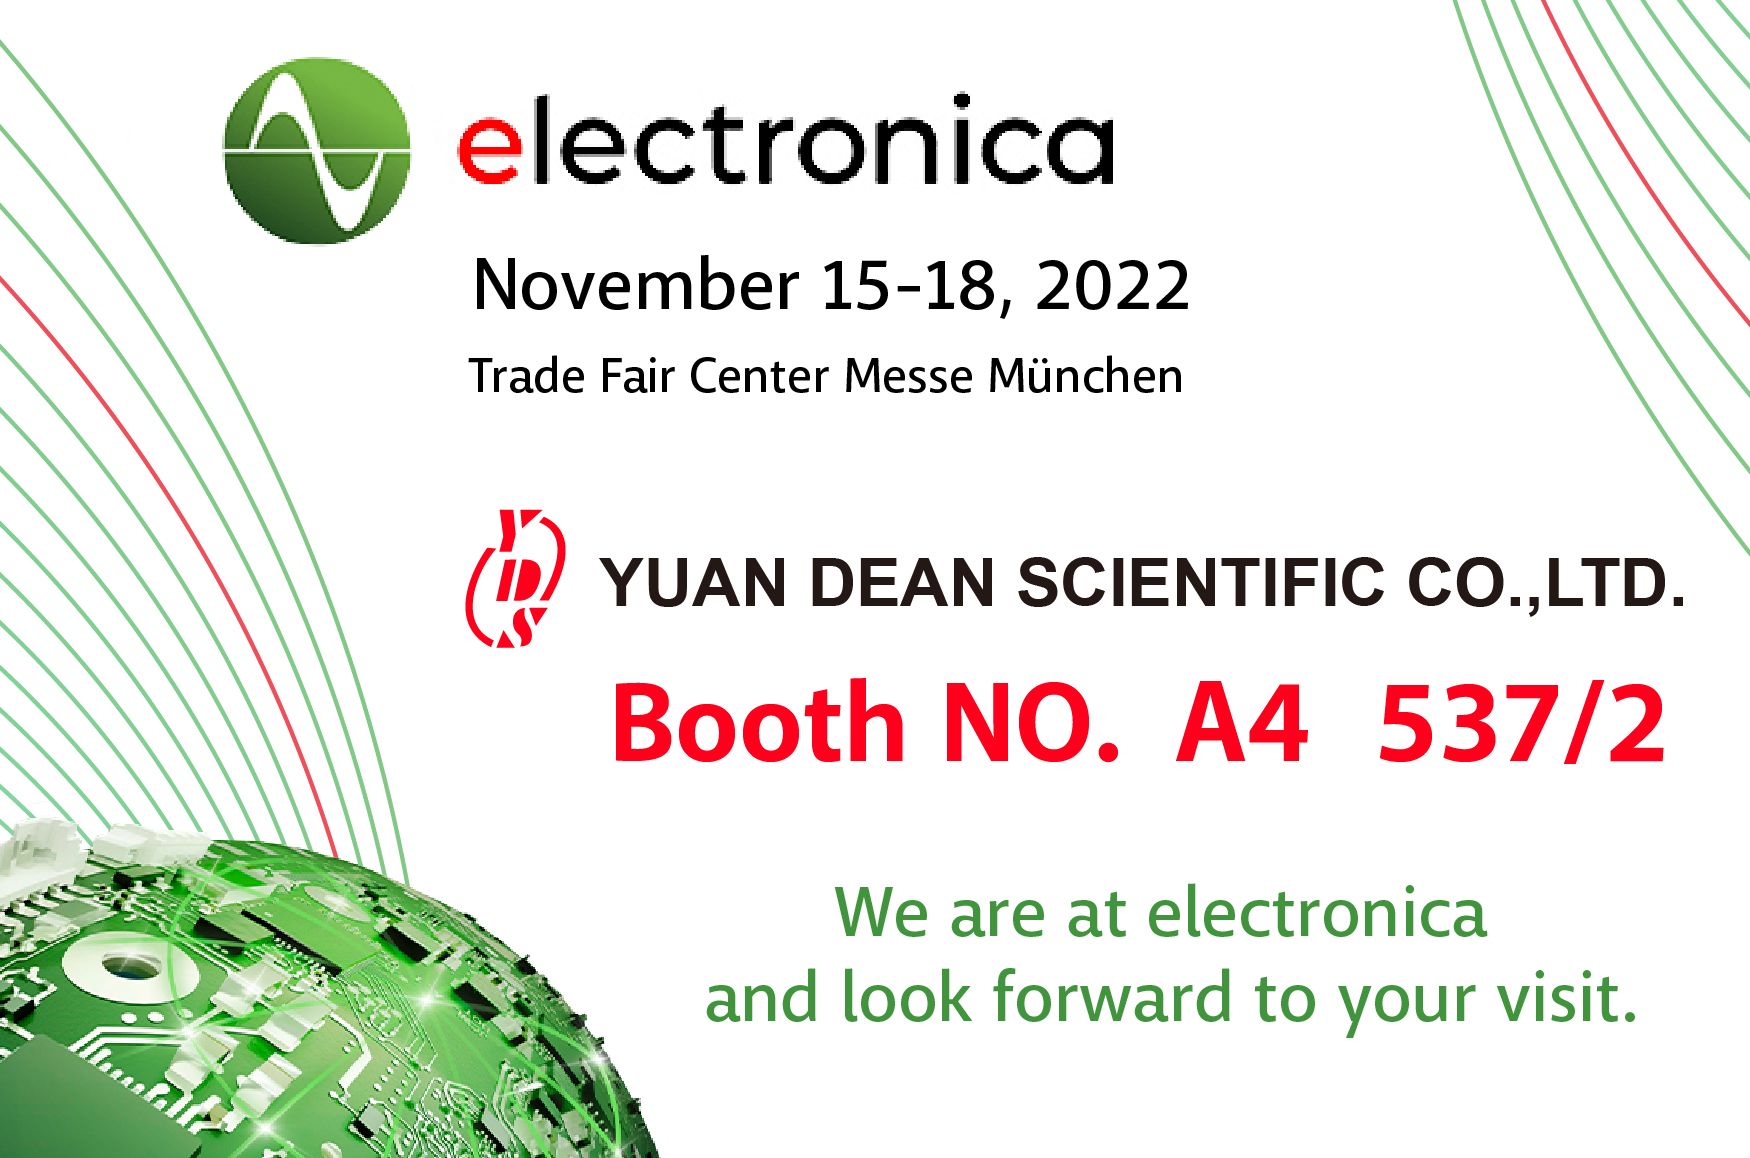 Join us at Hall A4 537/2 from Nov. 15-18, 2022 in Munich, Germany